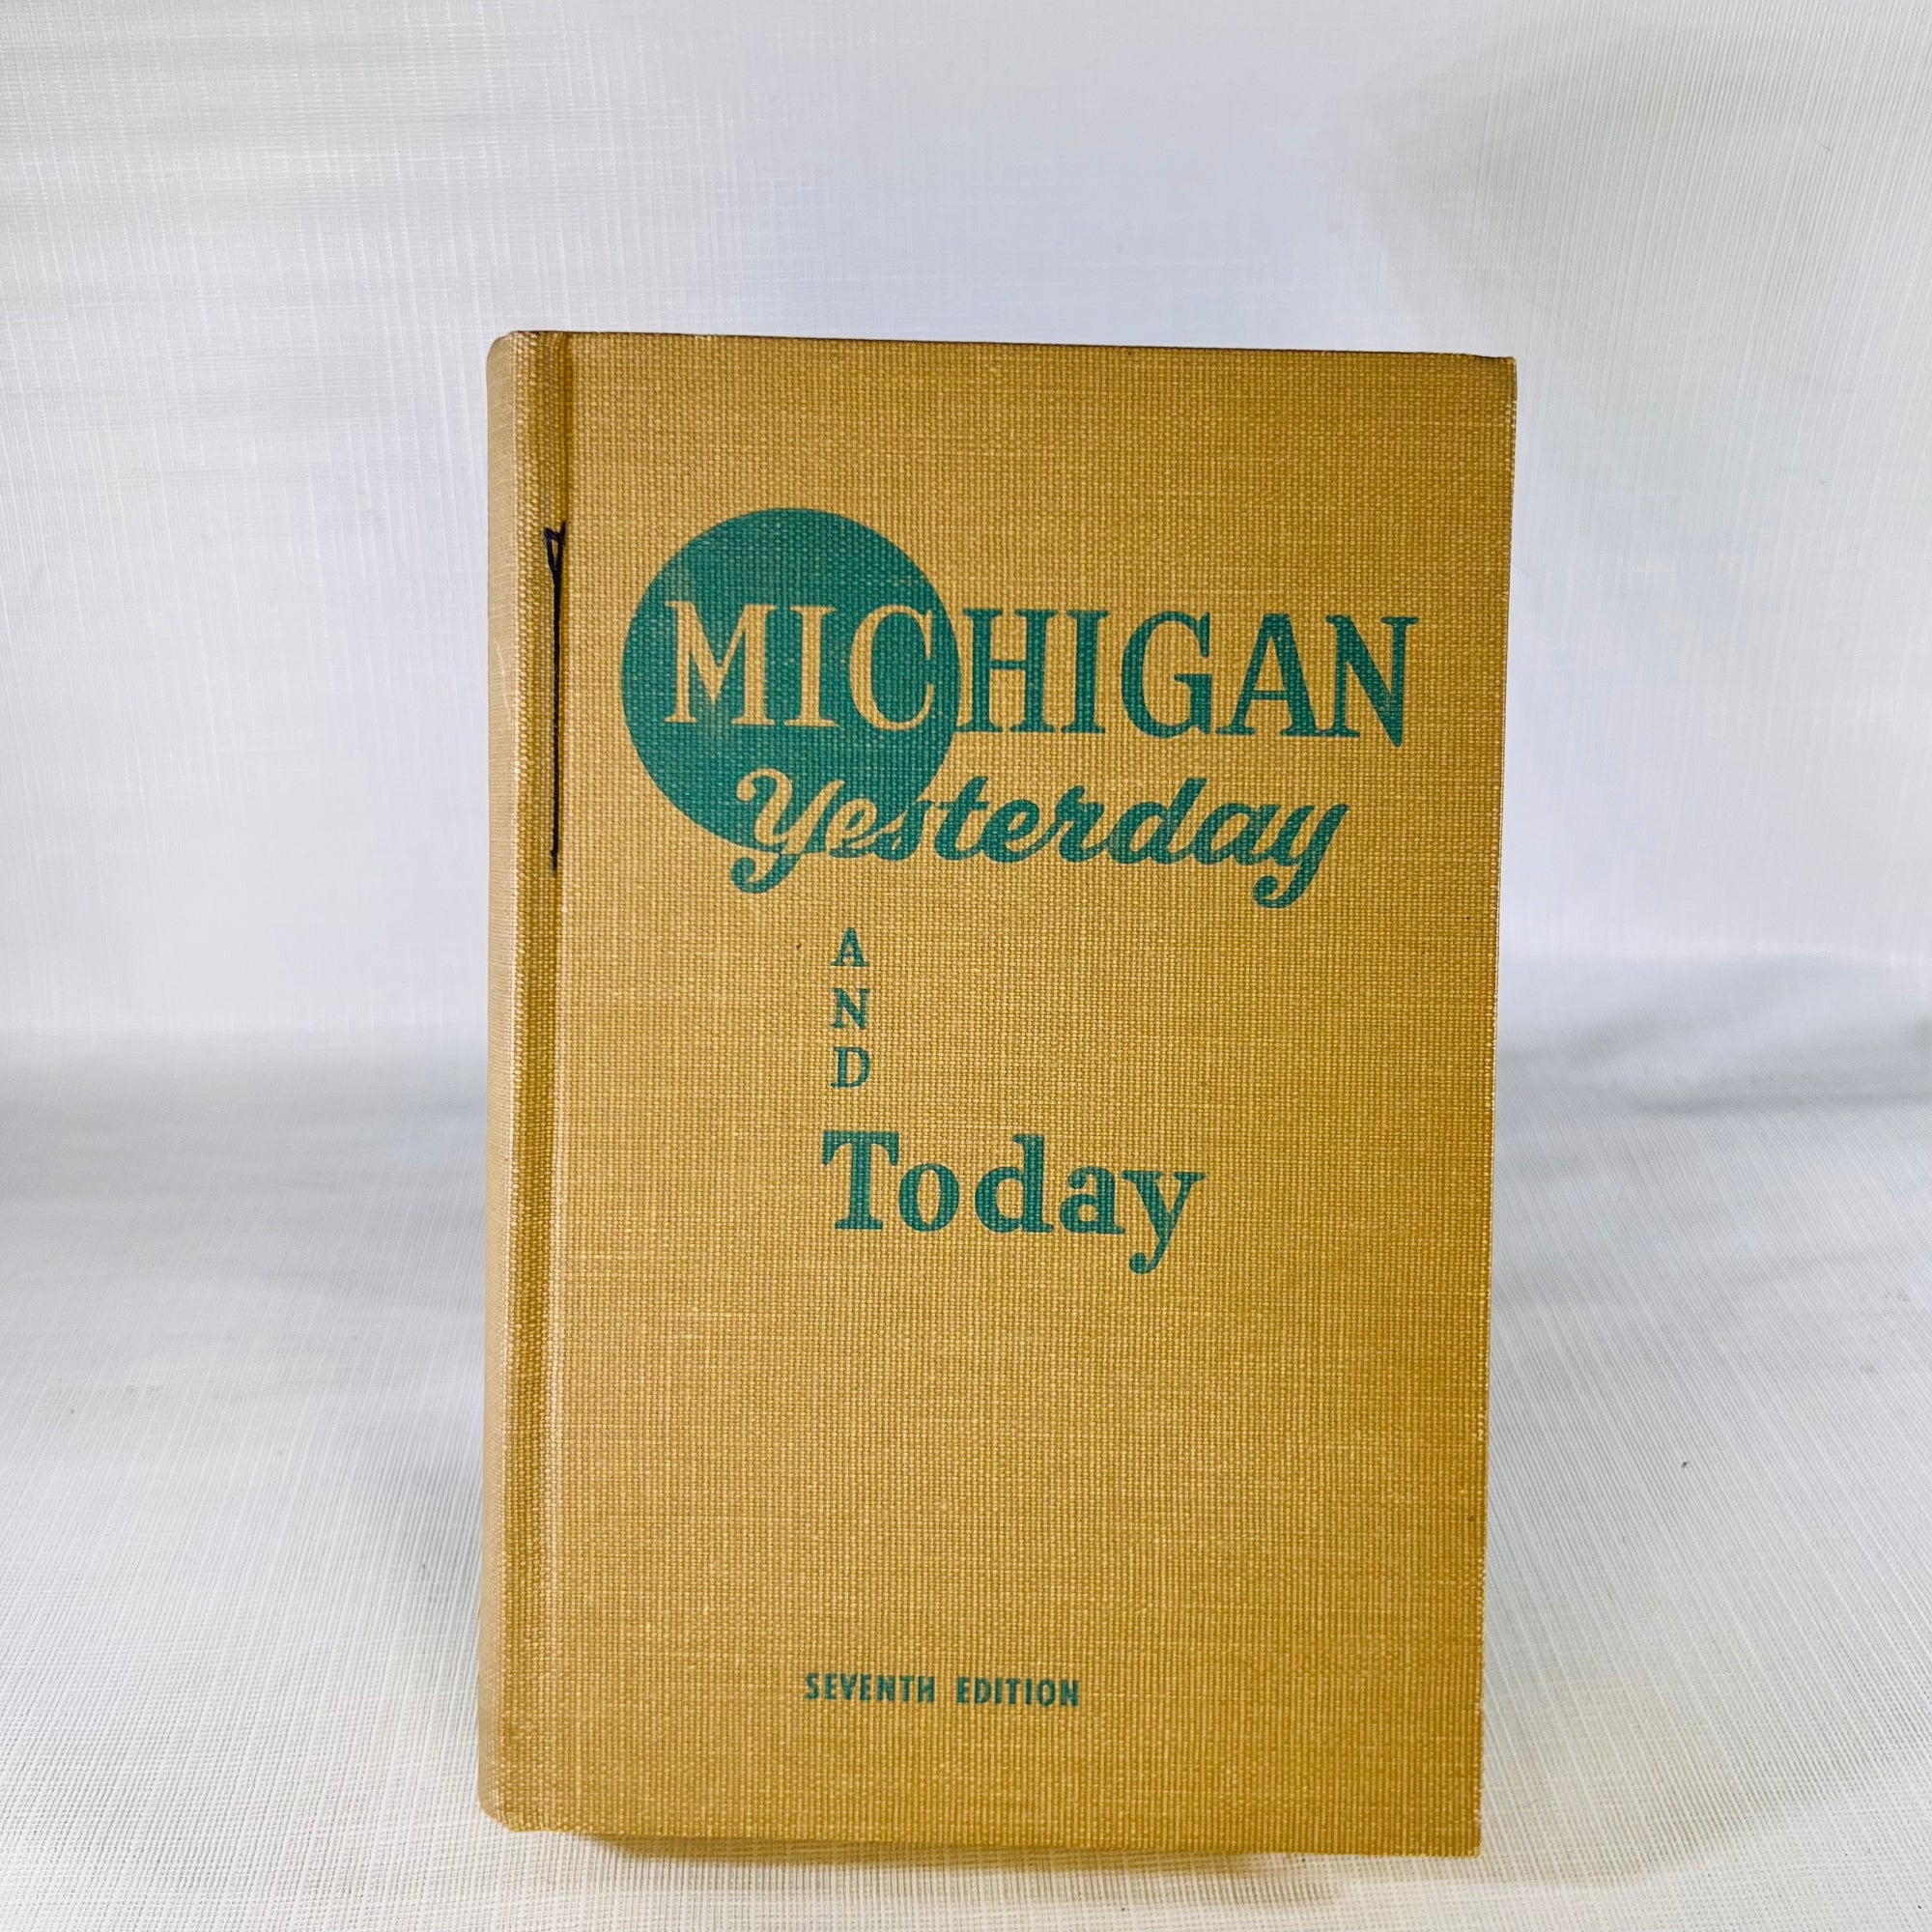 Michigan Yesterday and Today Seventh Edition by Ferris E. Lewis Hillsdale Education Publishers